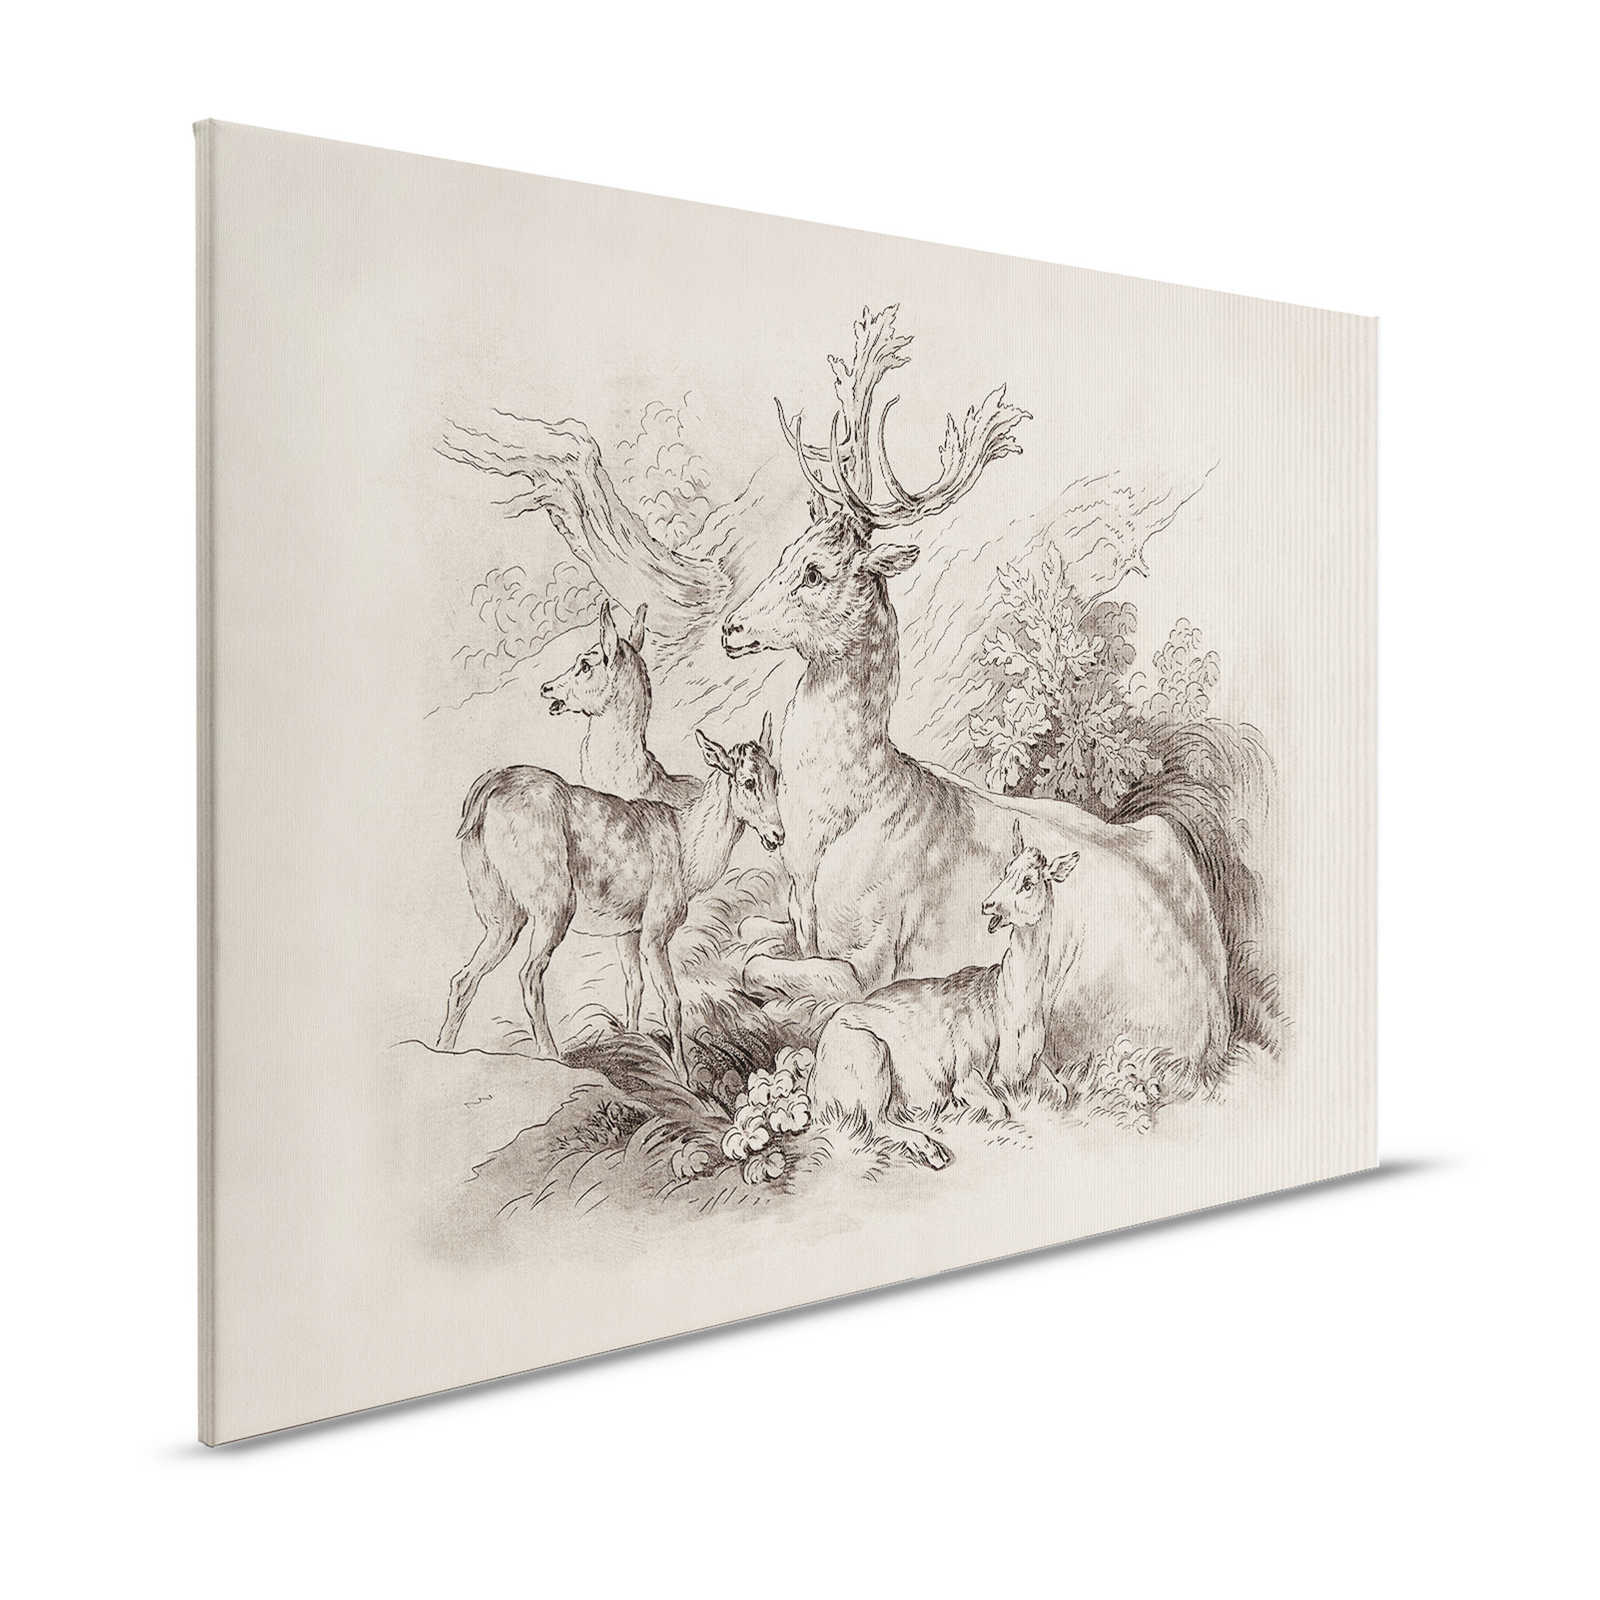 On the Grass 1 - Canvas painting Deer & Stag Vintage Drawing in Beige - 1.20 m x 0.80 m
